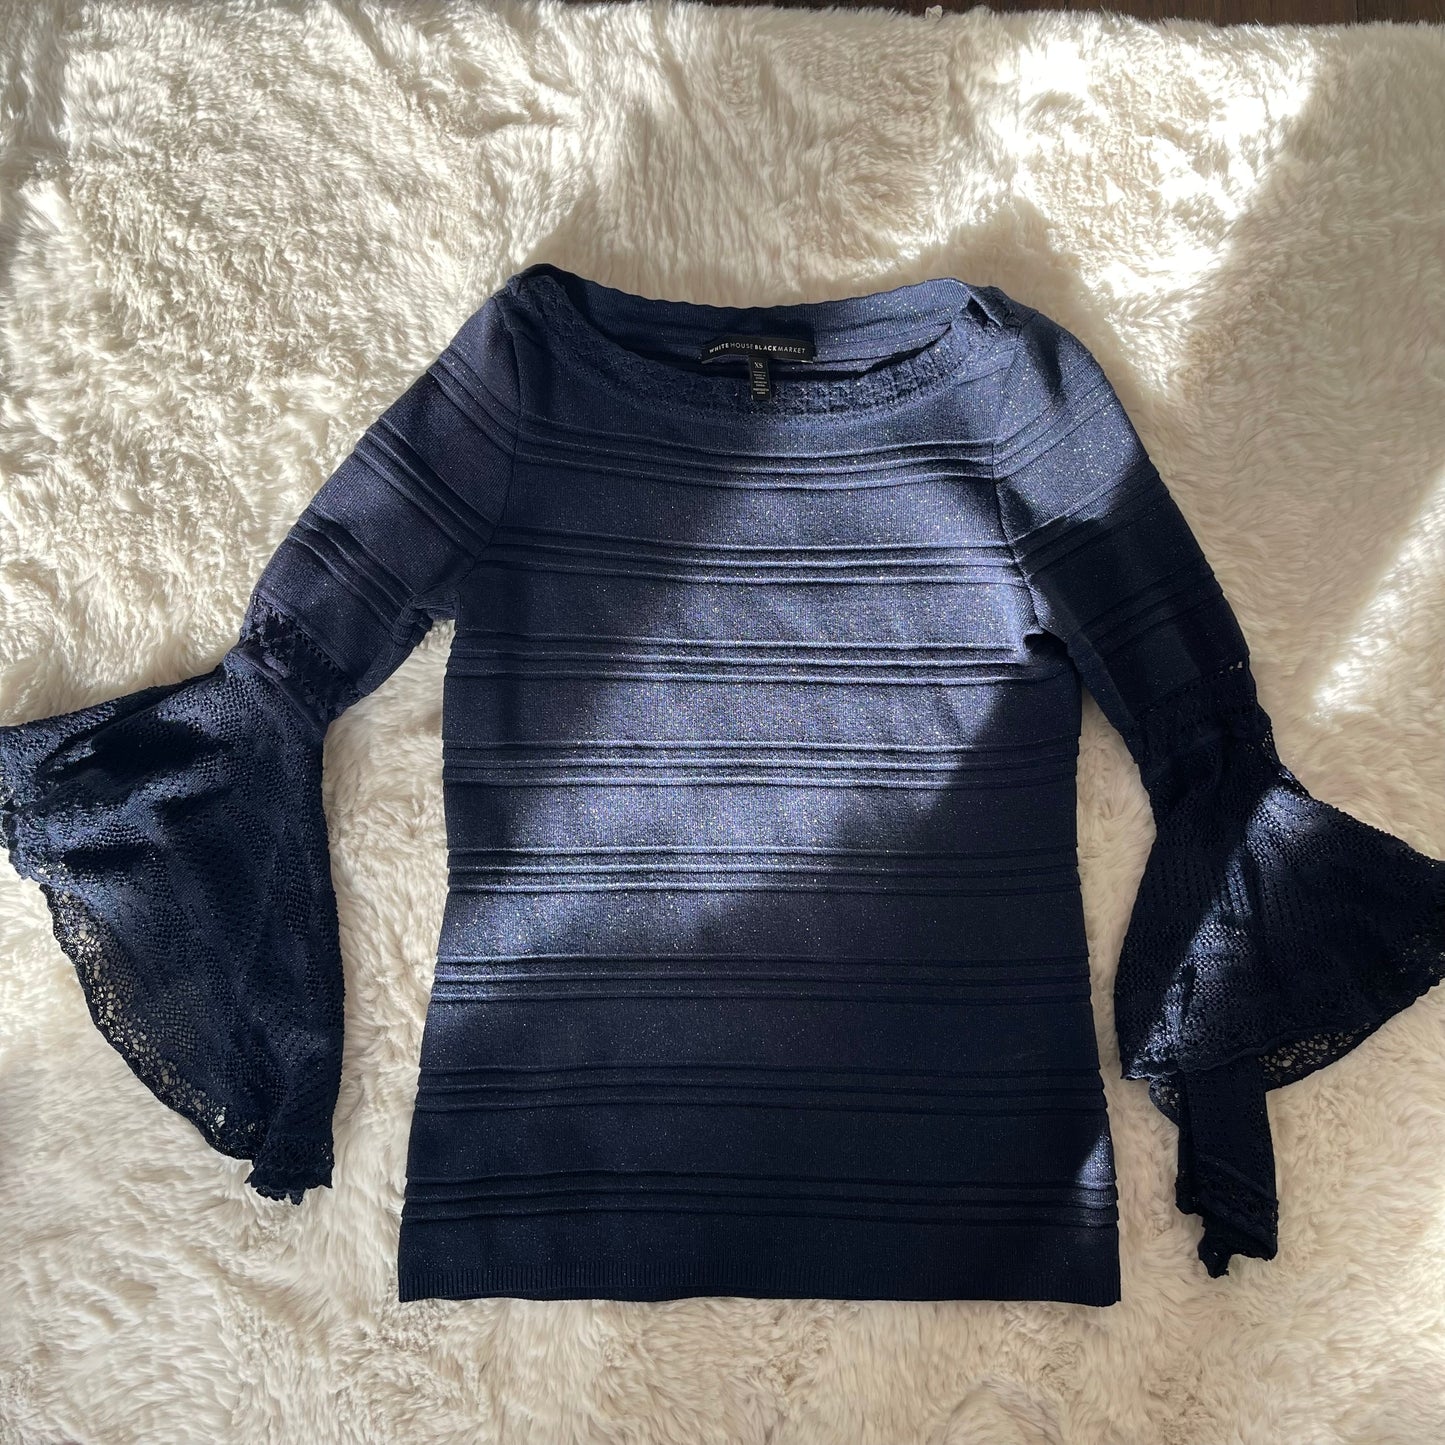 Navy Boatneck Bell Sleeve Knit Top